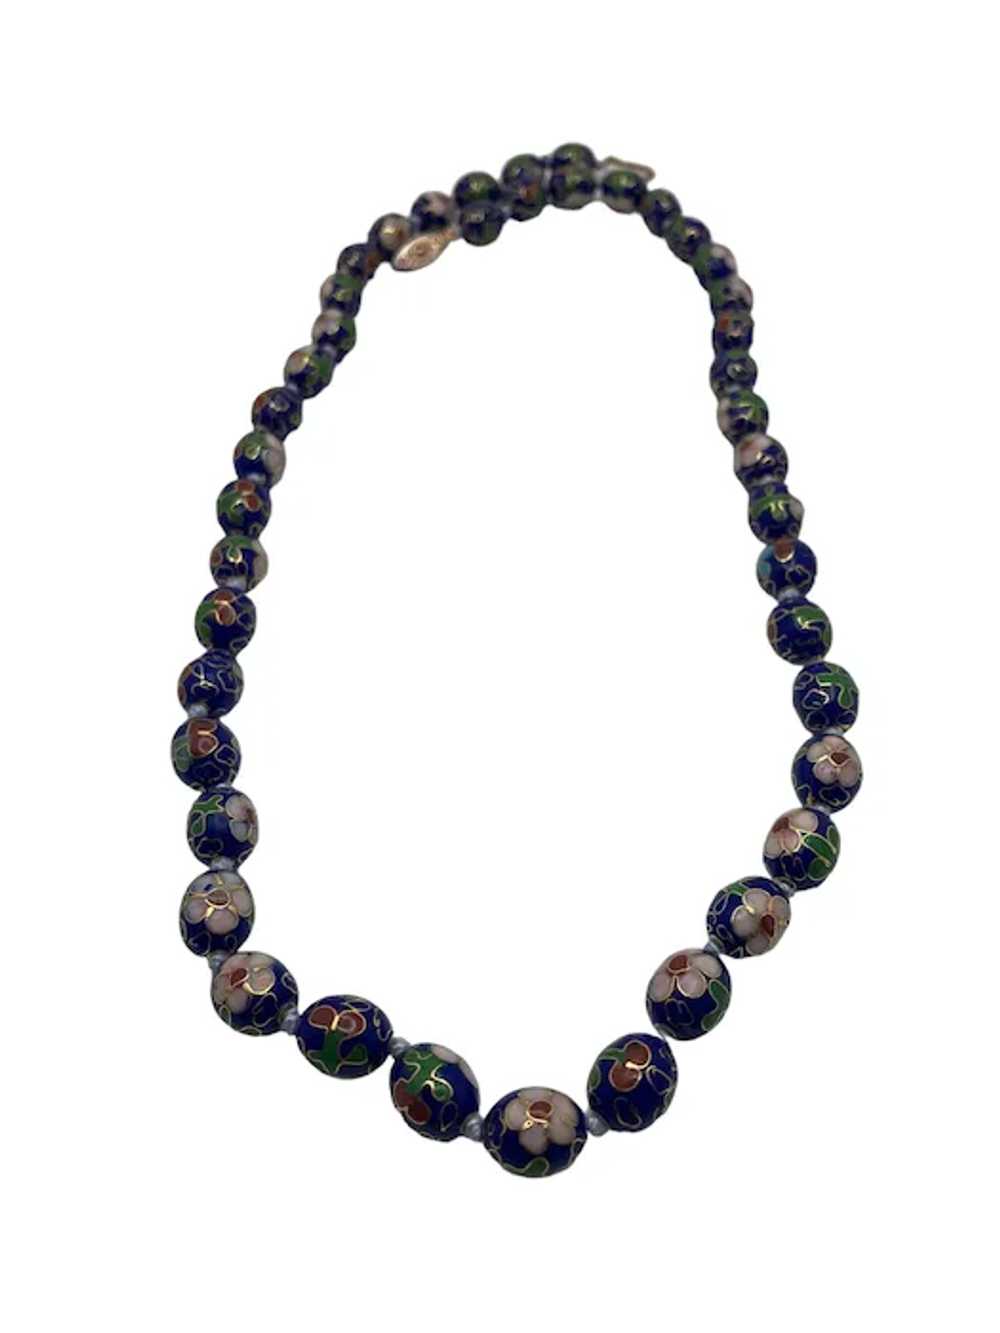 Vintage Chinese Cloisonne Oval Bead Necklace - image 2